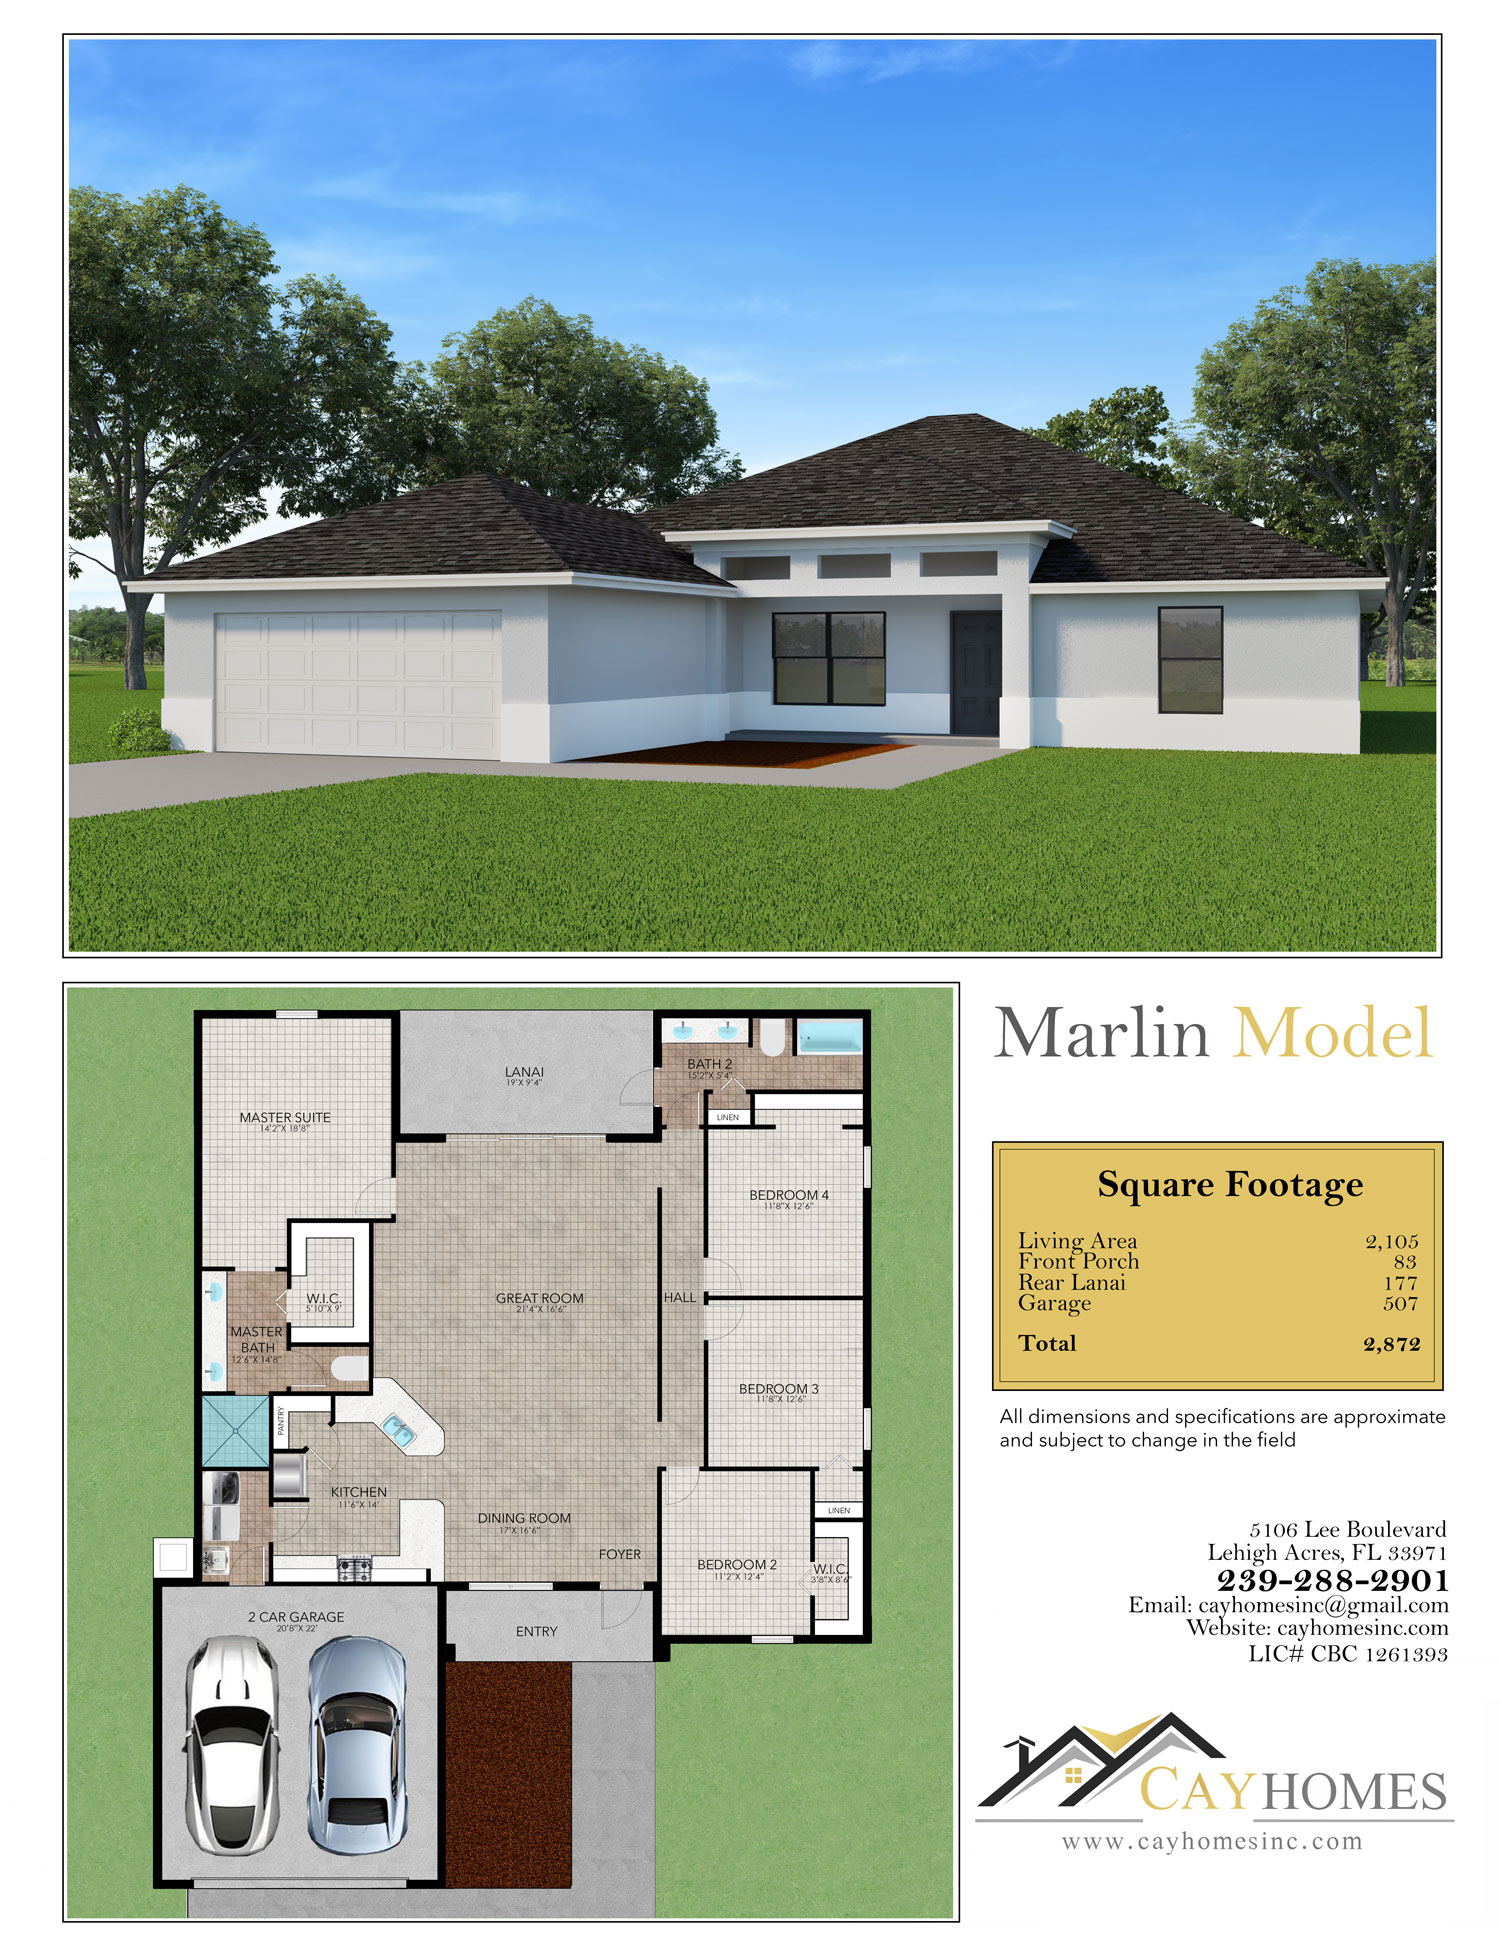 The Marlin Model by Cay Homes in Lehigh Acres